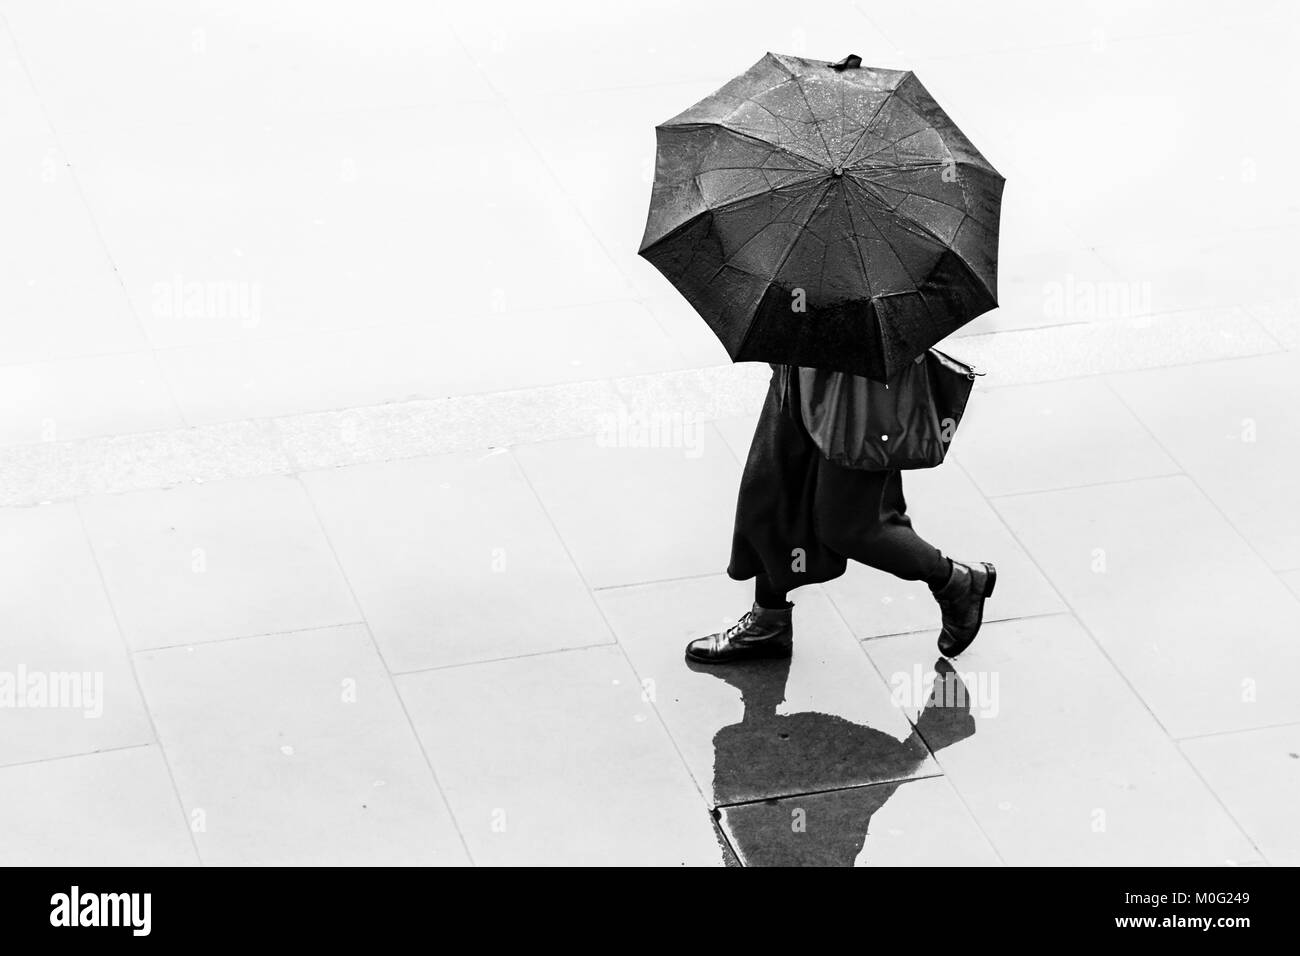 London Black and white street photography: Woman walking in rain with umbrella. Stock Photo